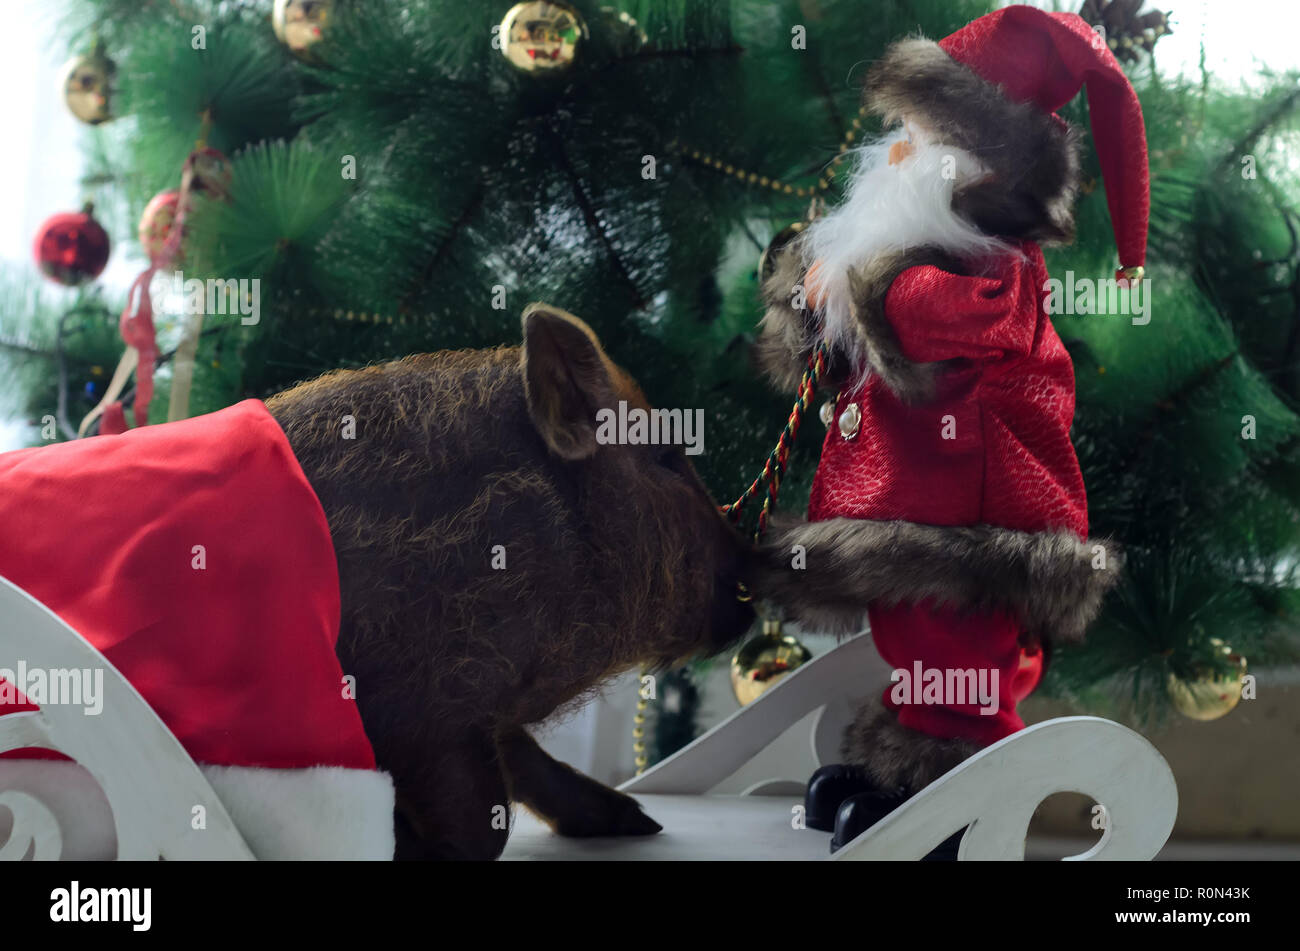 the pig sniffs a toy Santa on the Christmas tree. Stock Photo